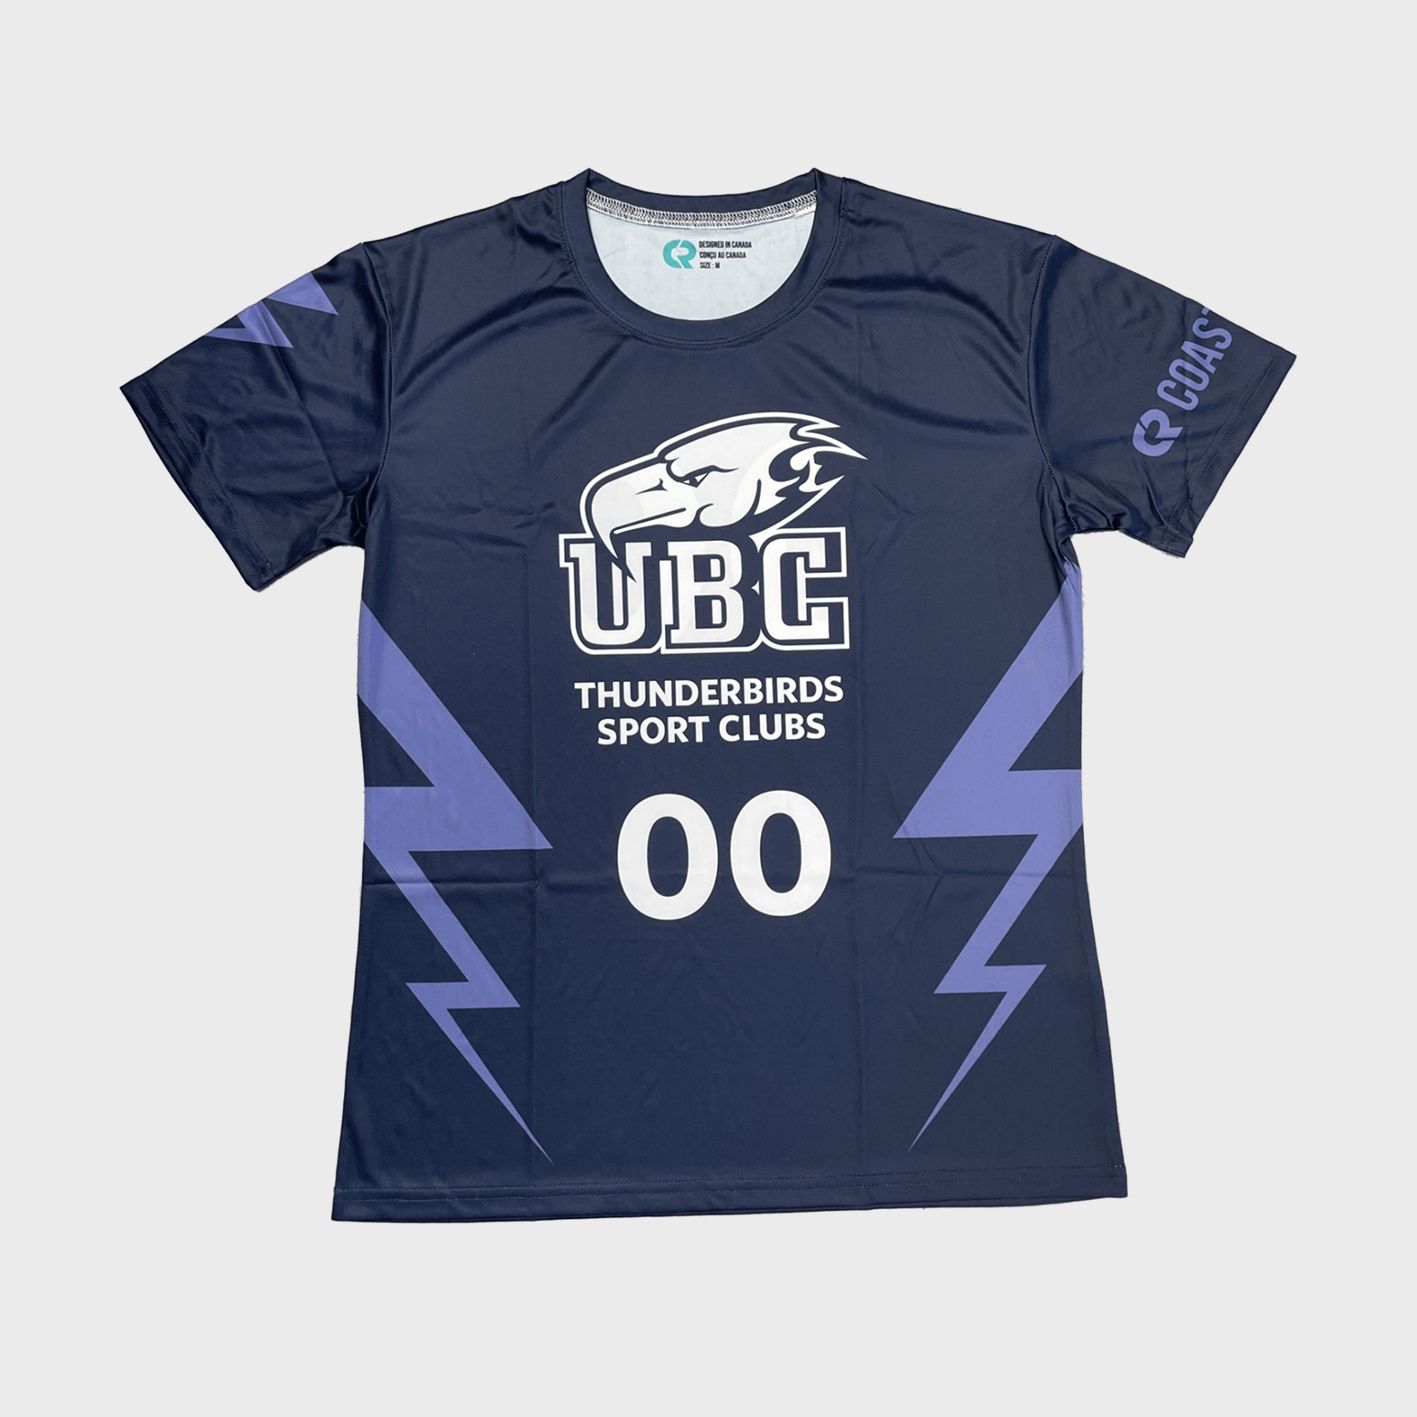 Custom Jerseys, Custom Uniforms for Ultimate Frisbee, Dragonboat and Team  Apparel.